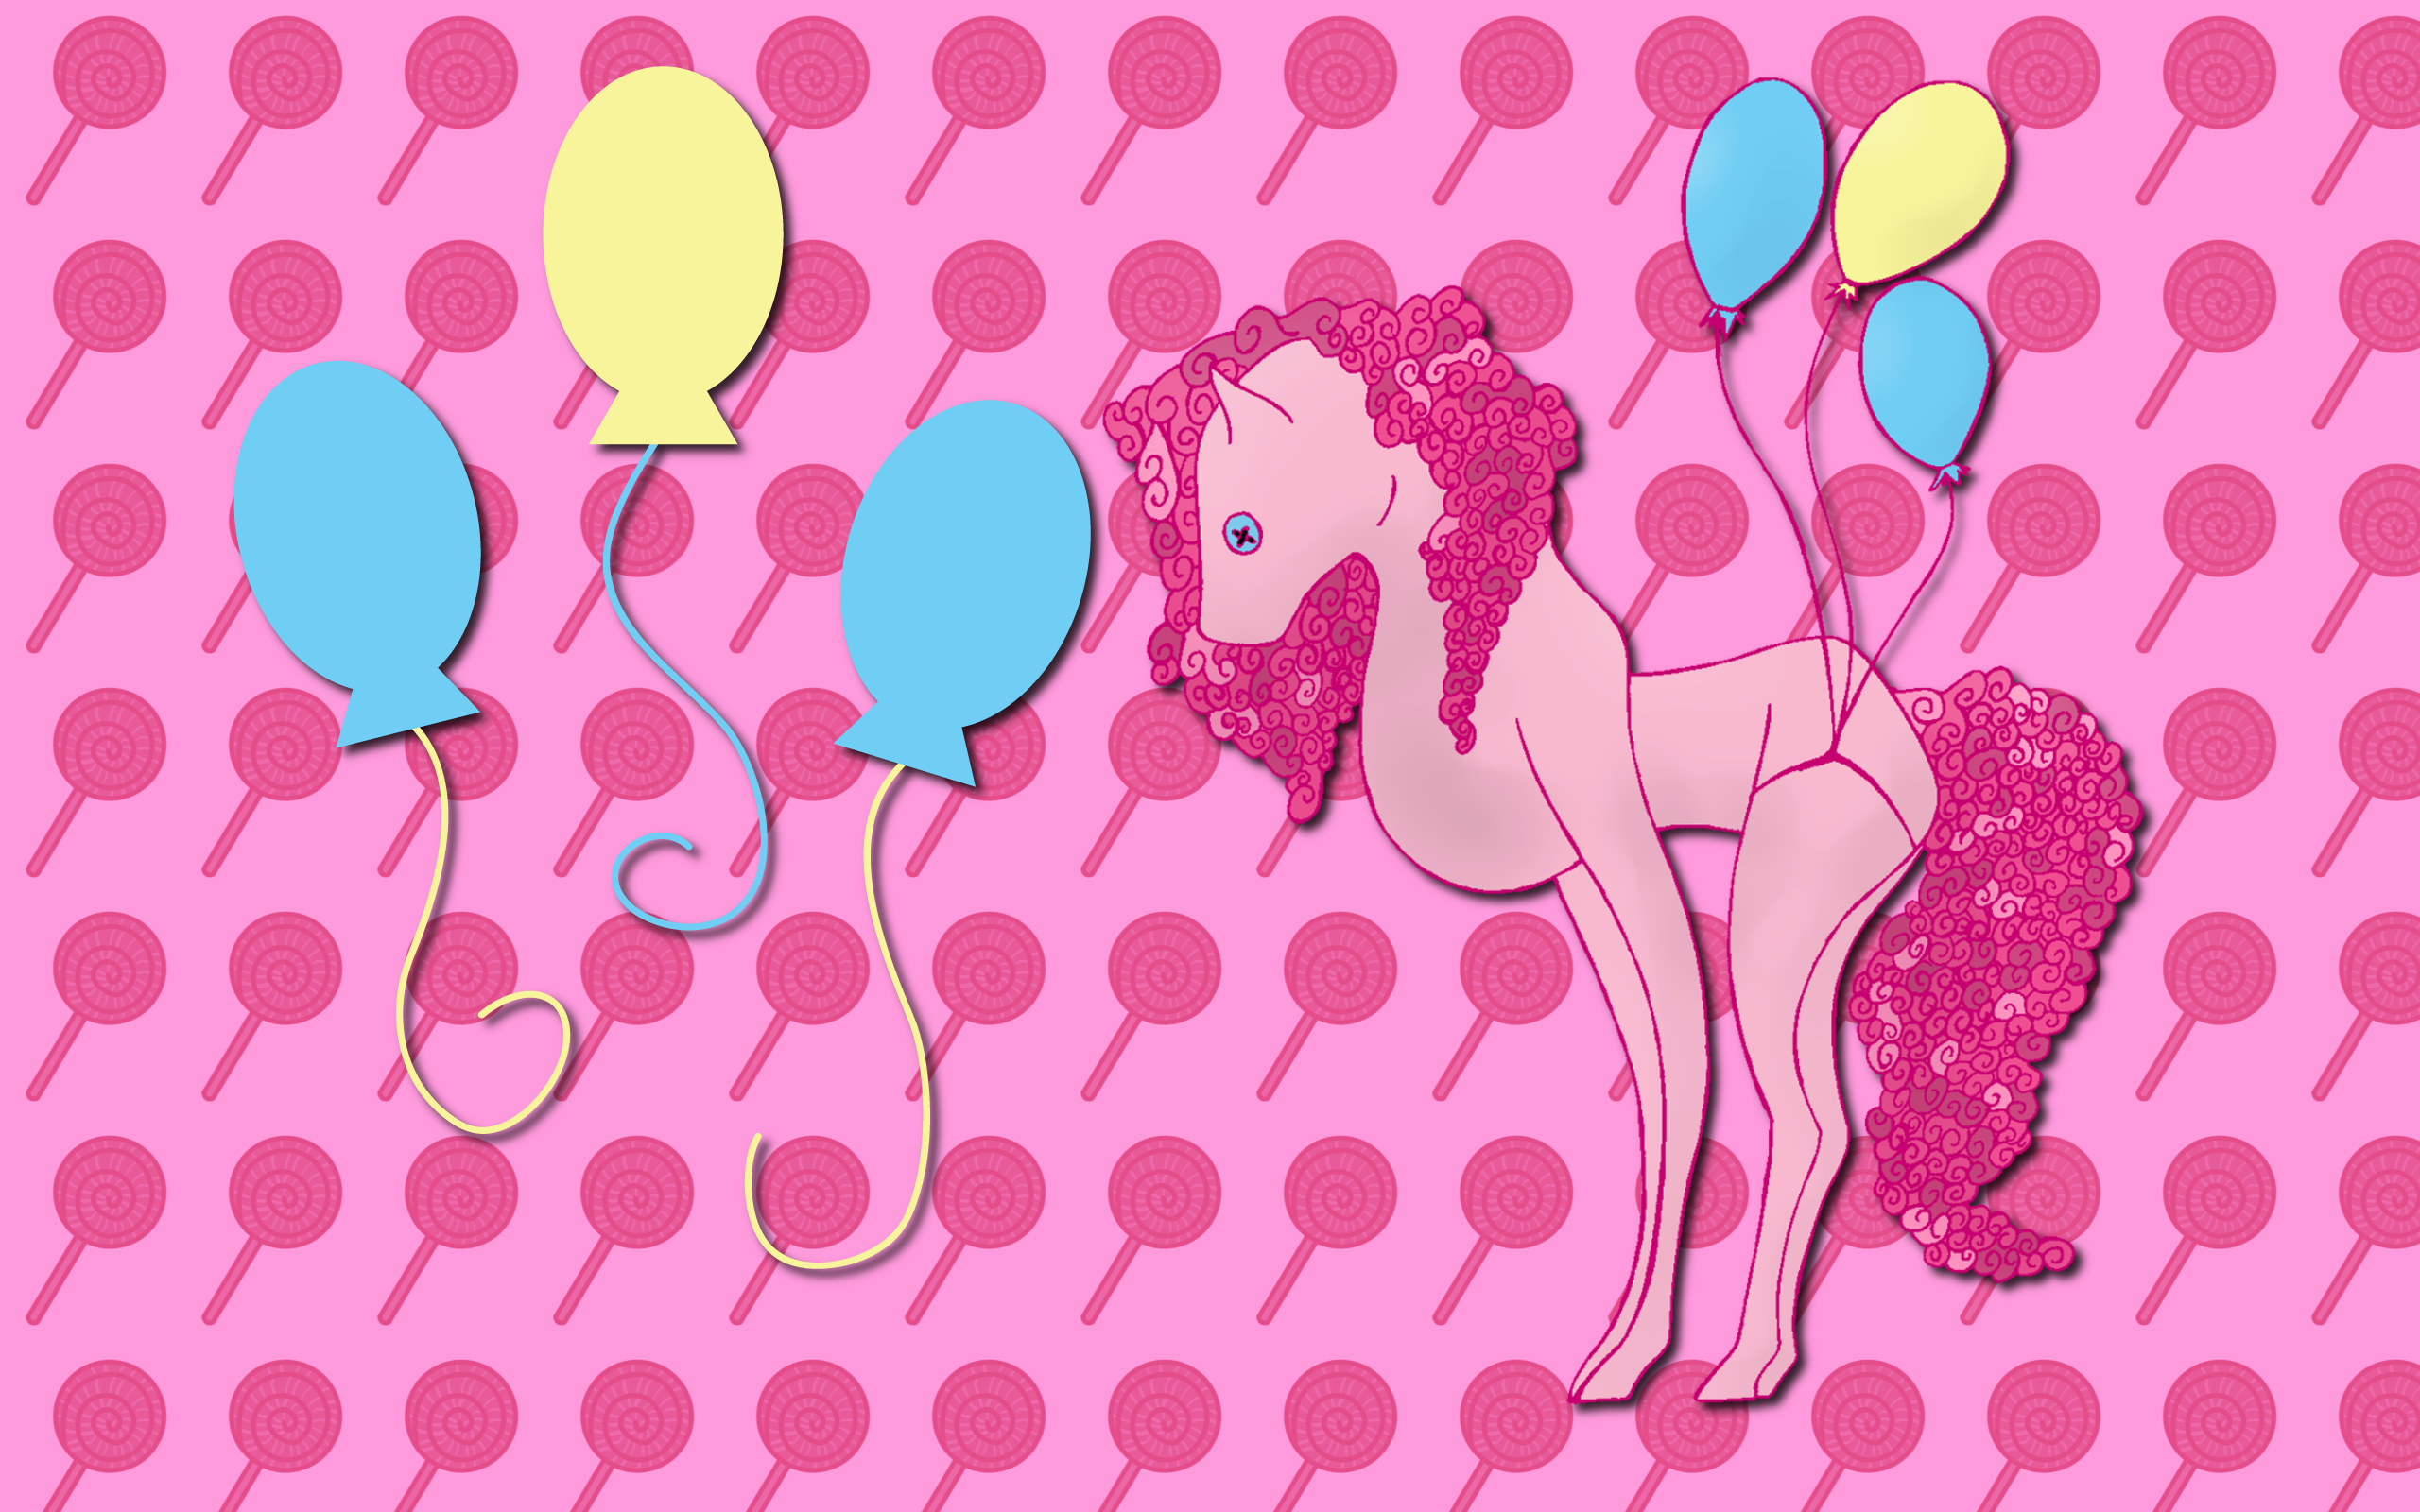 Horse Pinkie Pie WP by AliceHumanSacrifice0, Namisho and ooklah